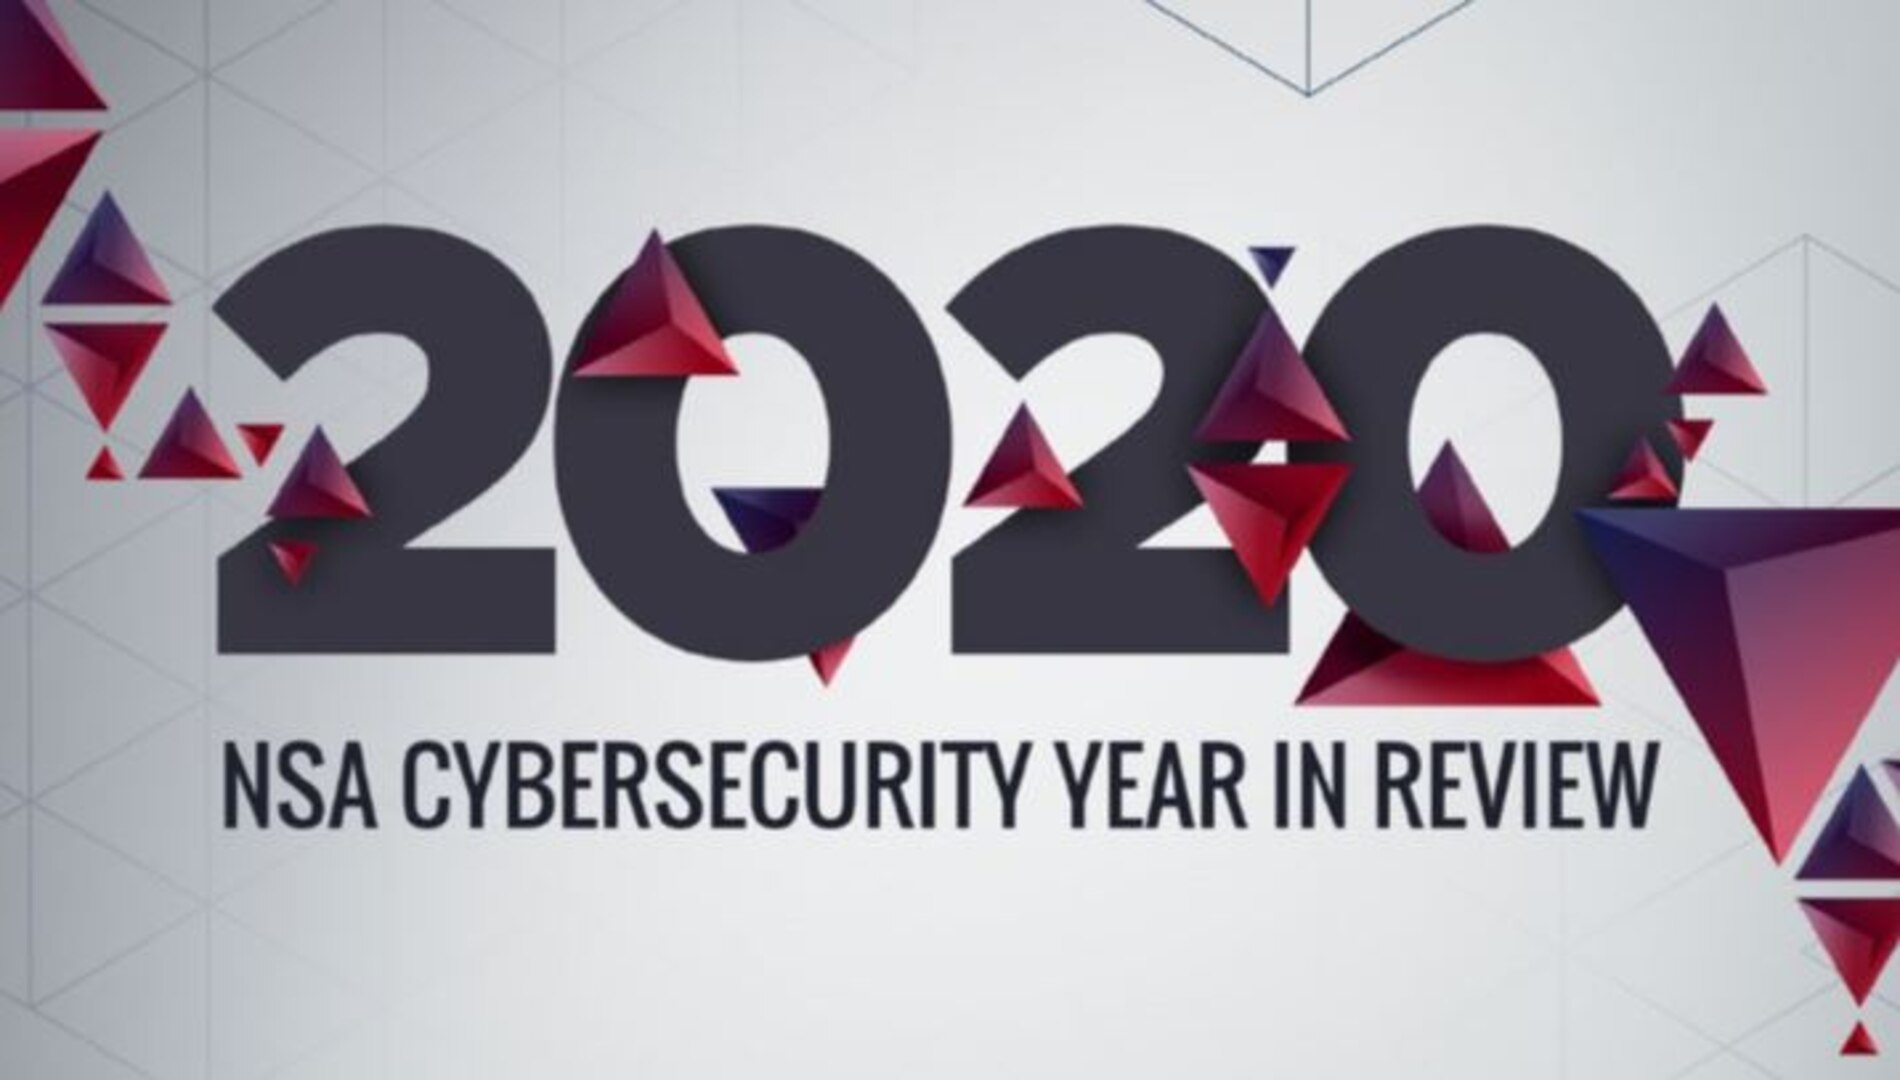 2020 NSA Cybersecurity Year in Review